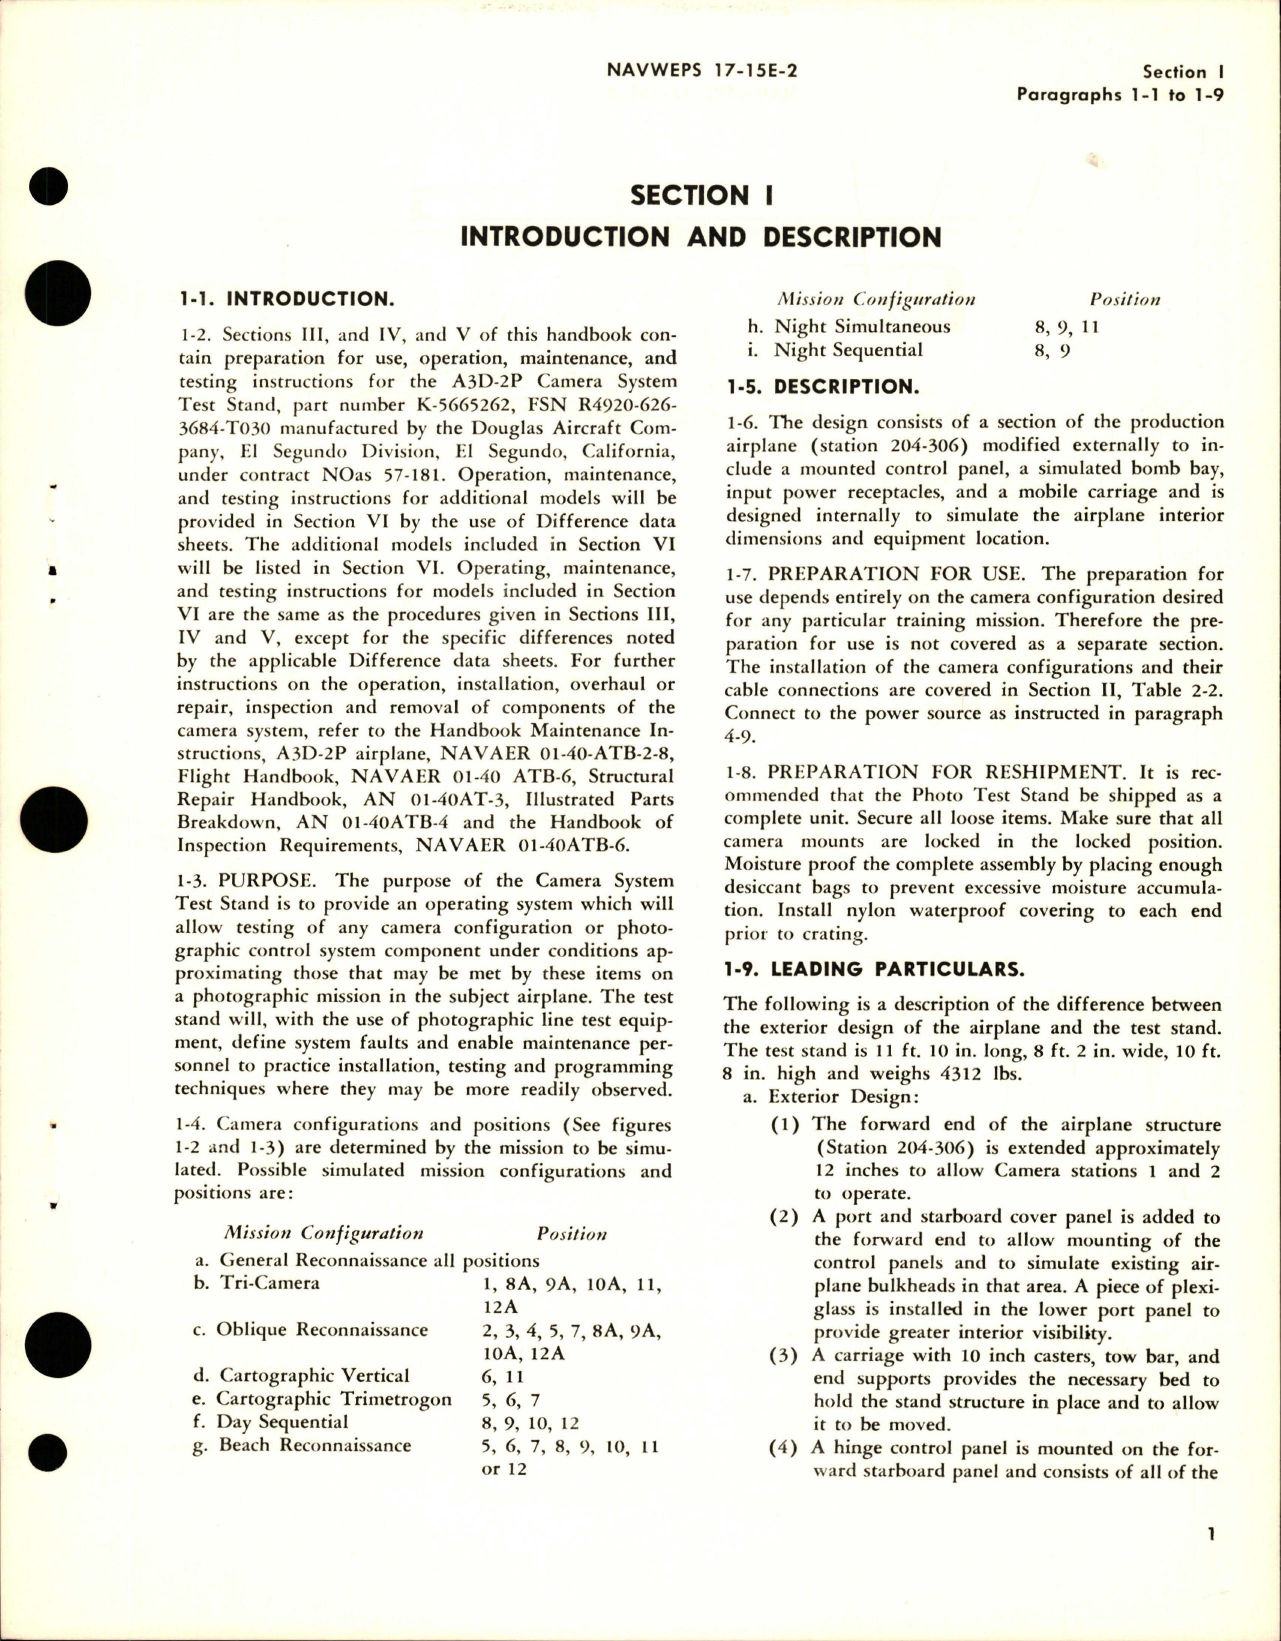 Sample page 9 from AirCorps Library document: Operation and Maintenance Instructions for Test Stand-Camera System - Part K5665262 